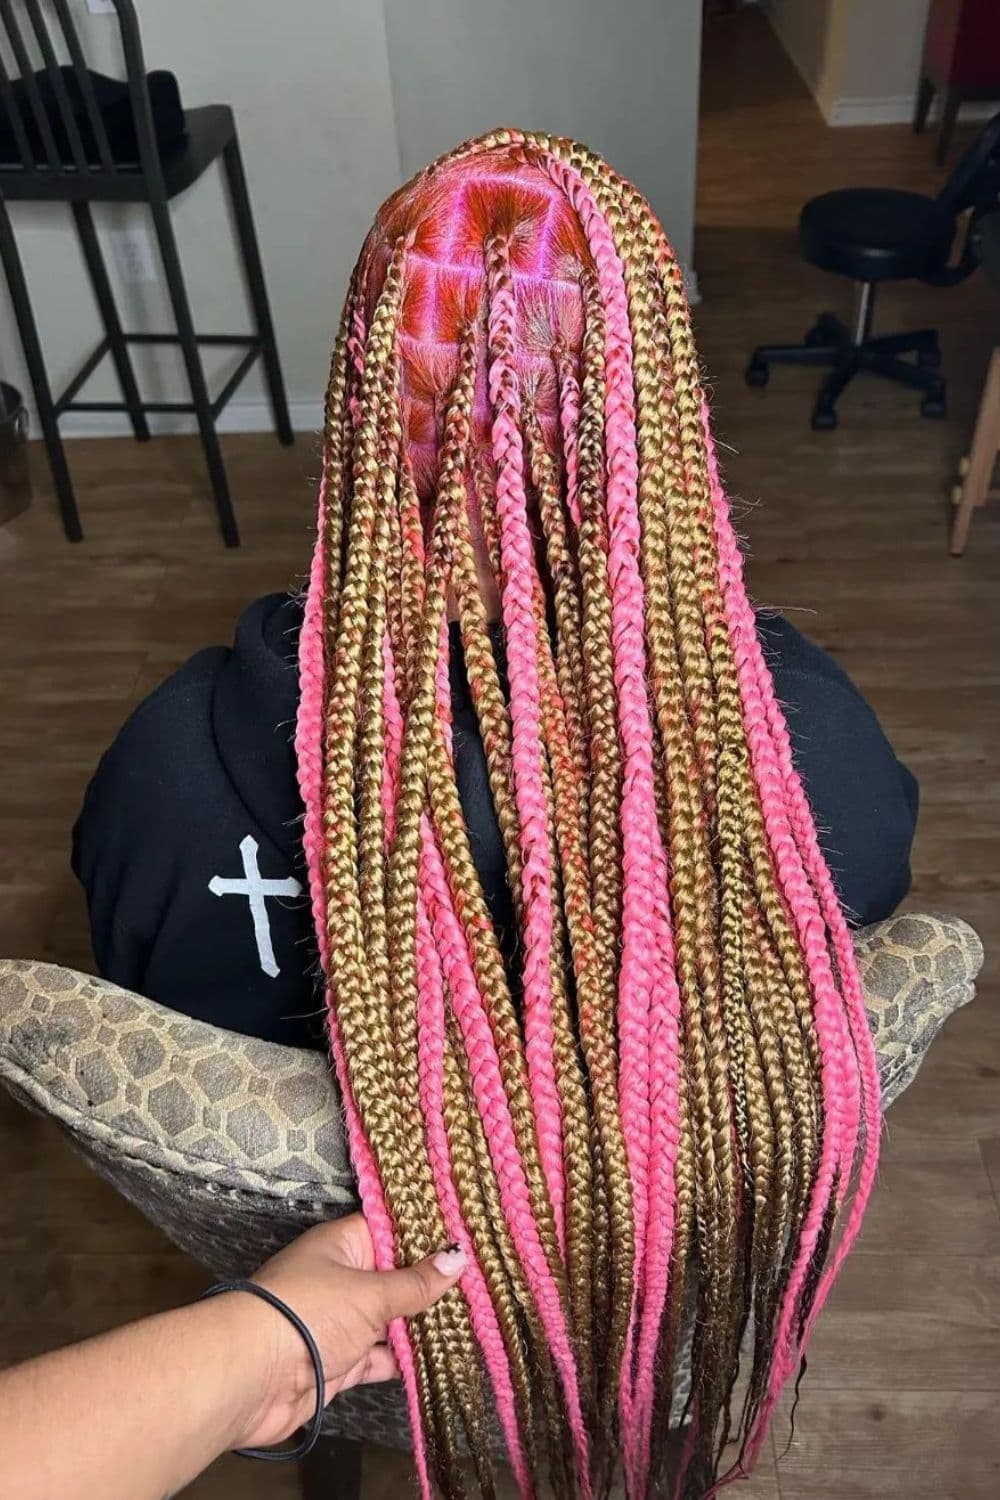 A woman with blonde and pink knotless braids.